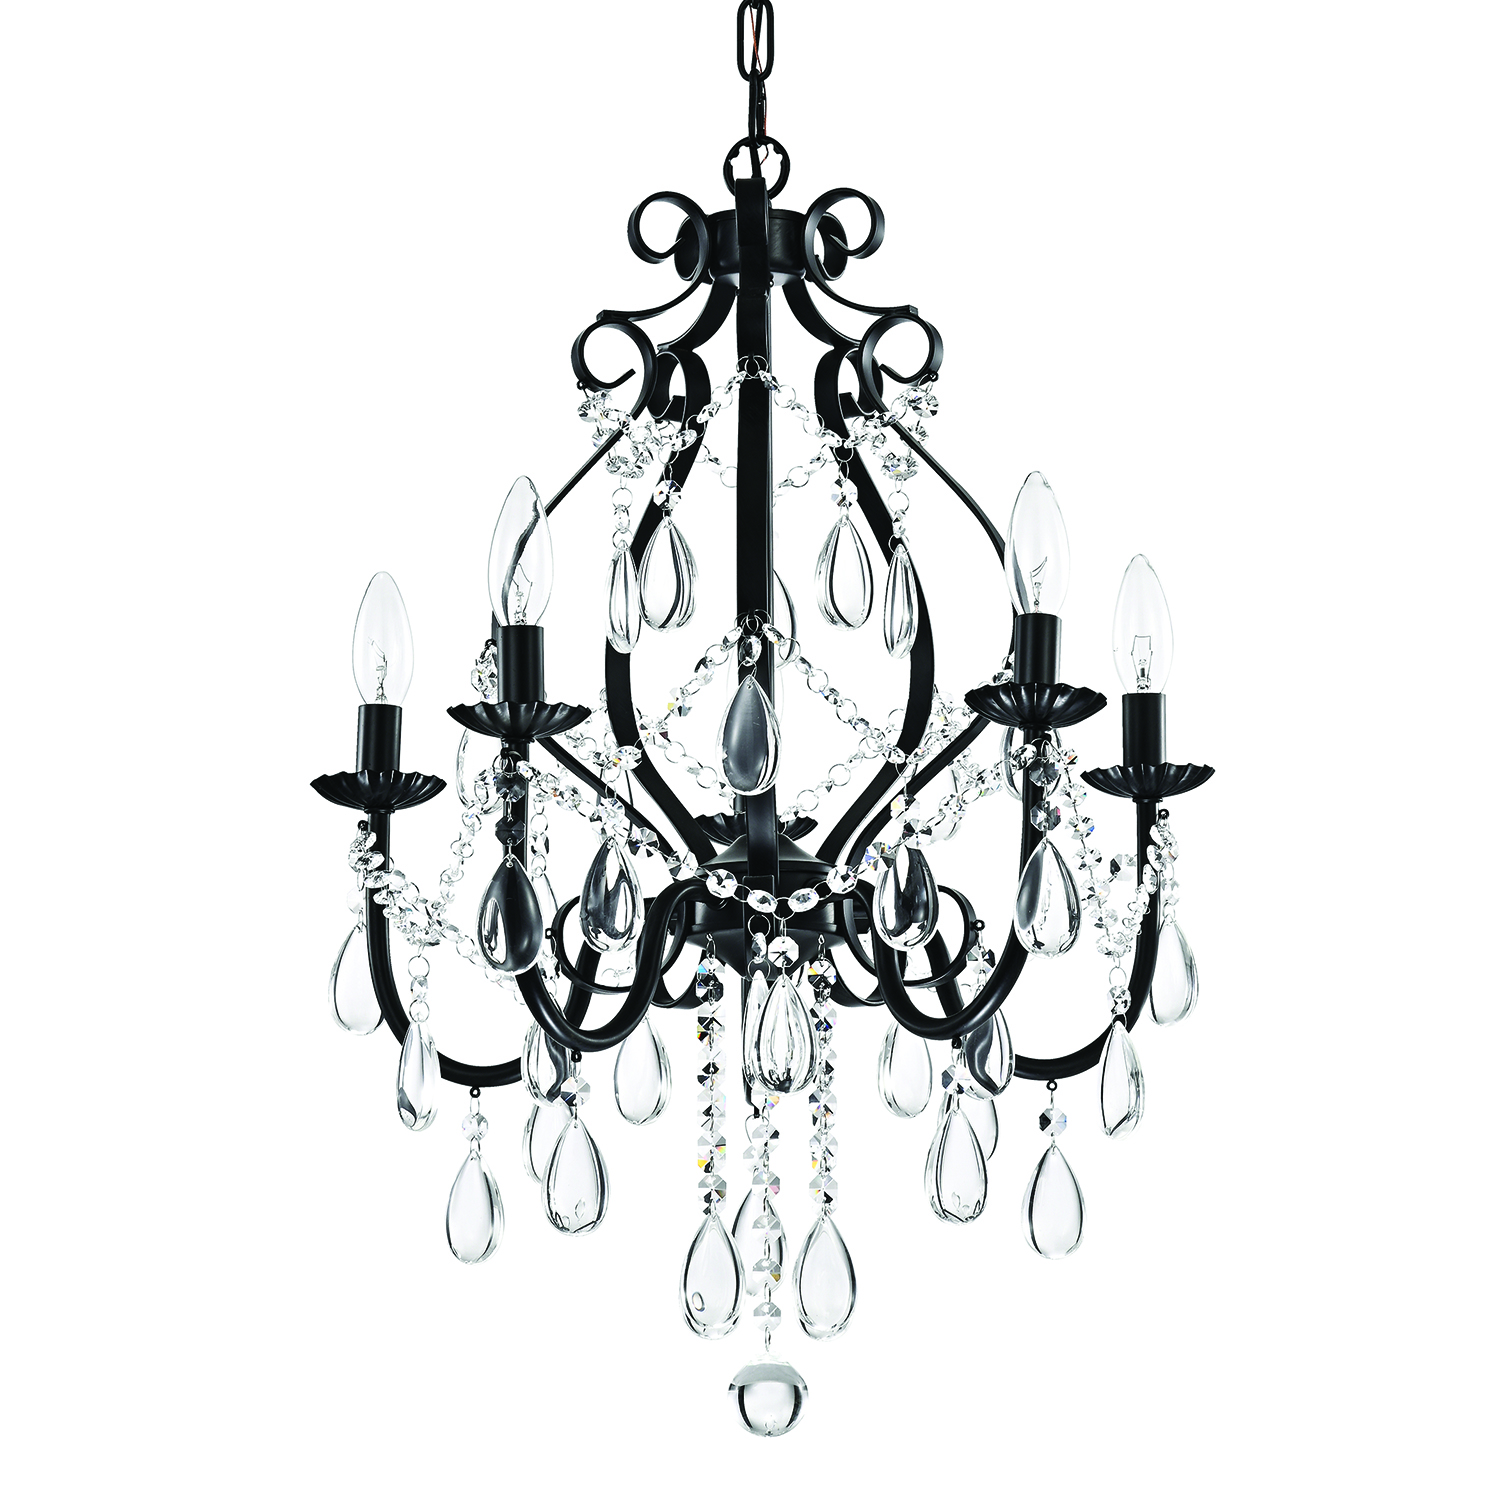 Featured image of post Crystal Chandelier Drawing / Decorative chandelier drawing on white background vector.